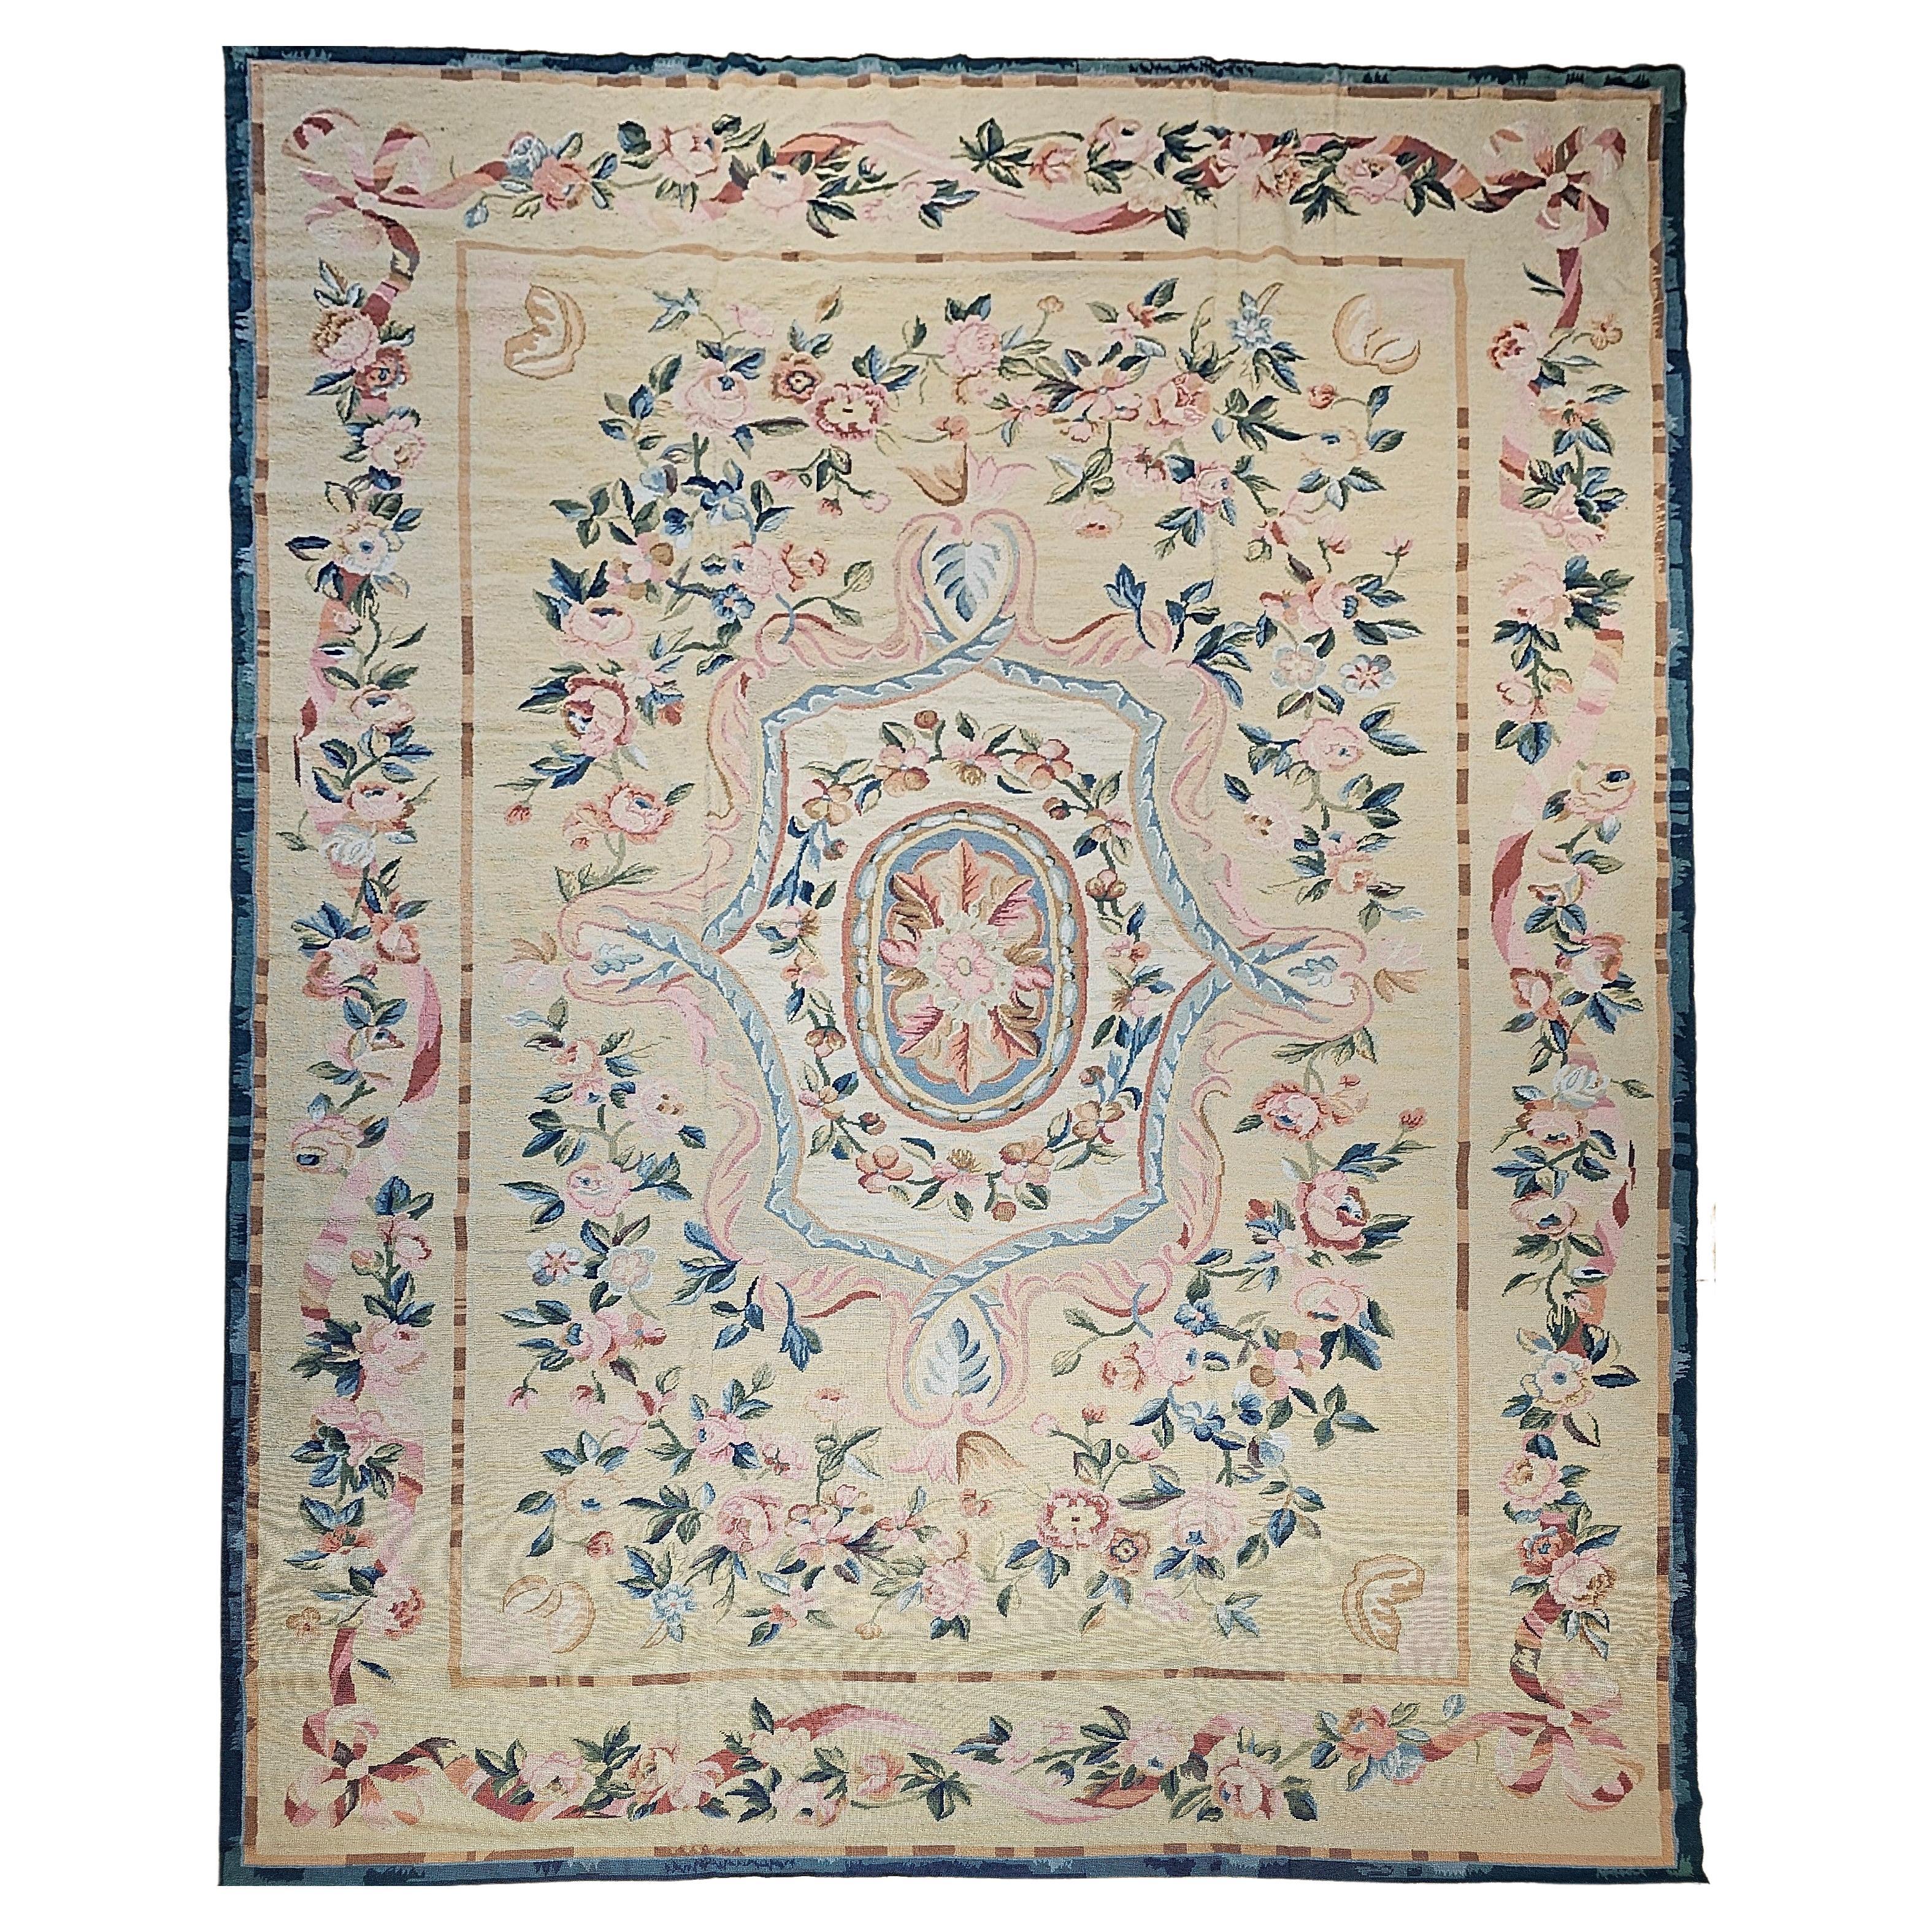 19th Century French Aubusson Needlepoint Carpet in Floral Pattern in Ivory, Blue